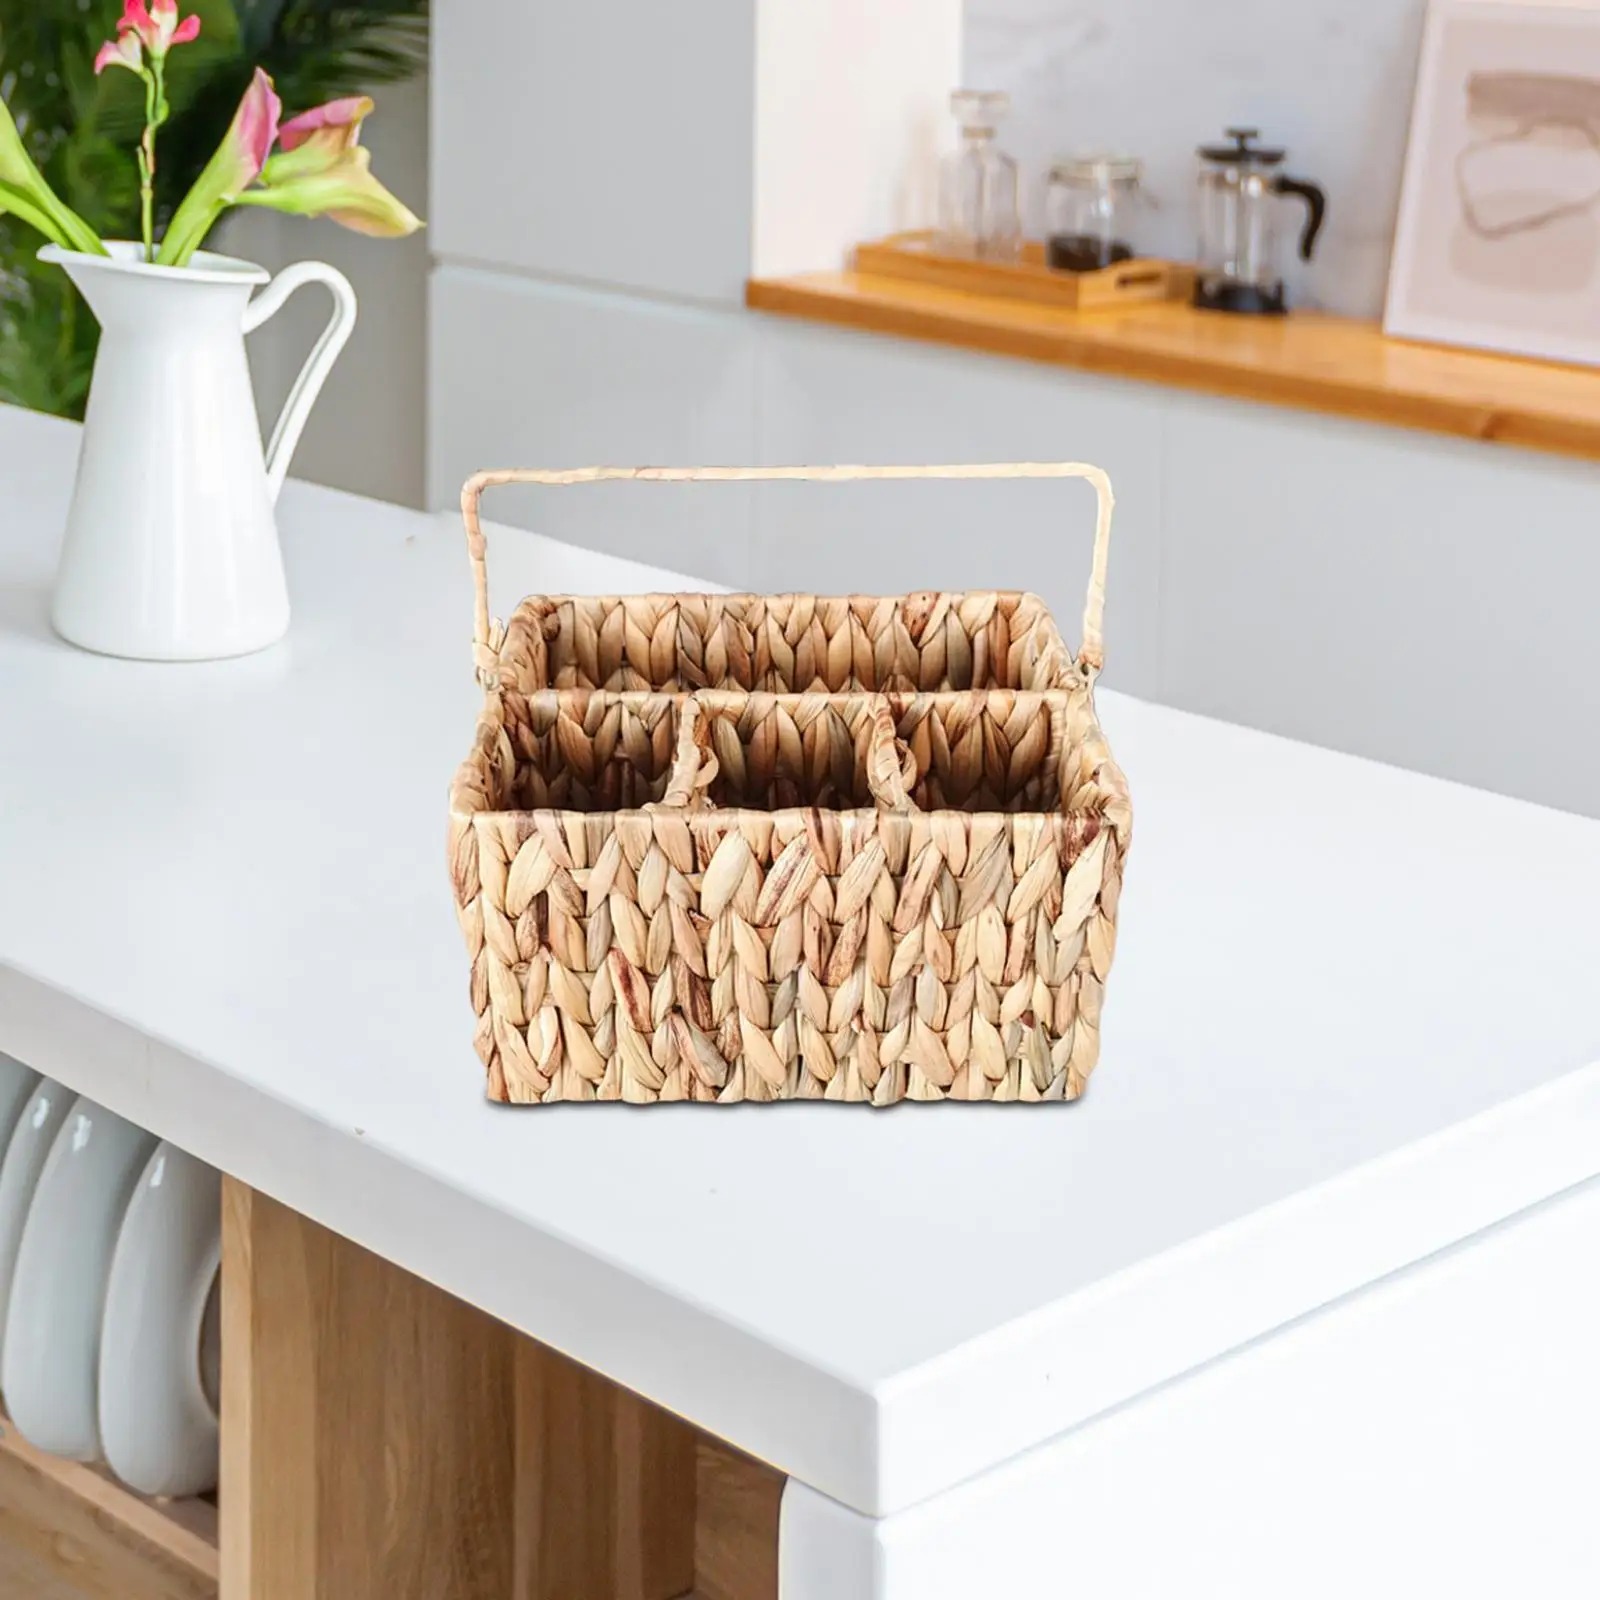 Rattan Woven Divided Storage Basket with Handle Handmade Multipurpose Cosmetics Holder 10x7.9x5.9inch for Restaurants Durable